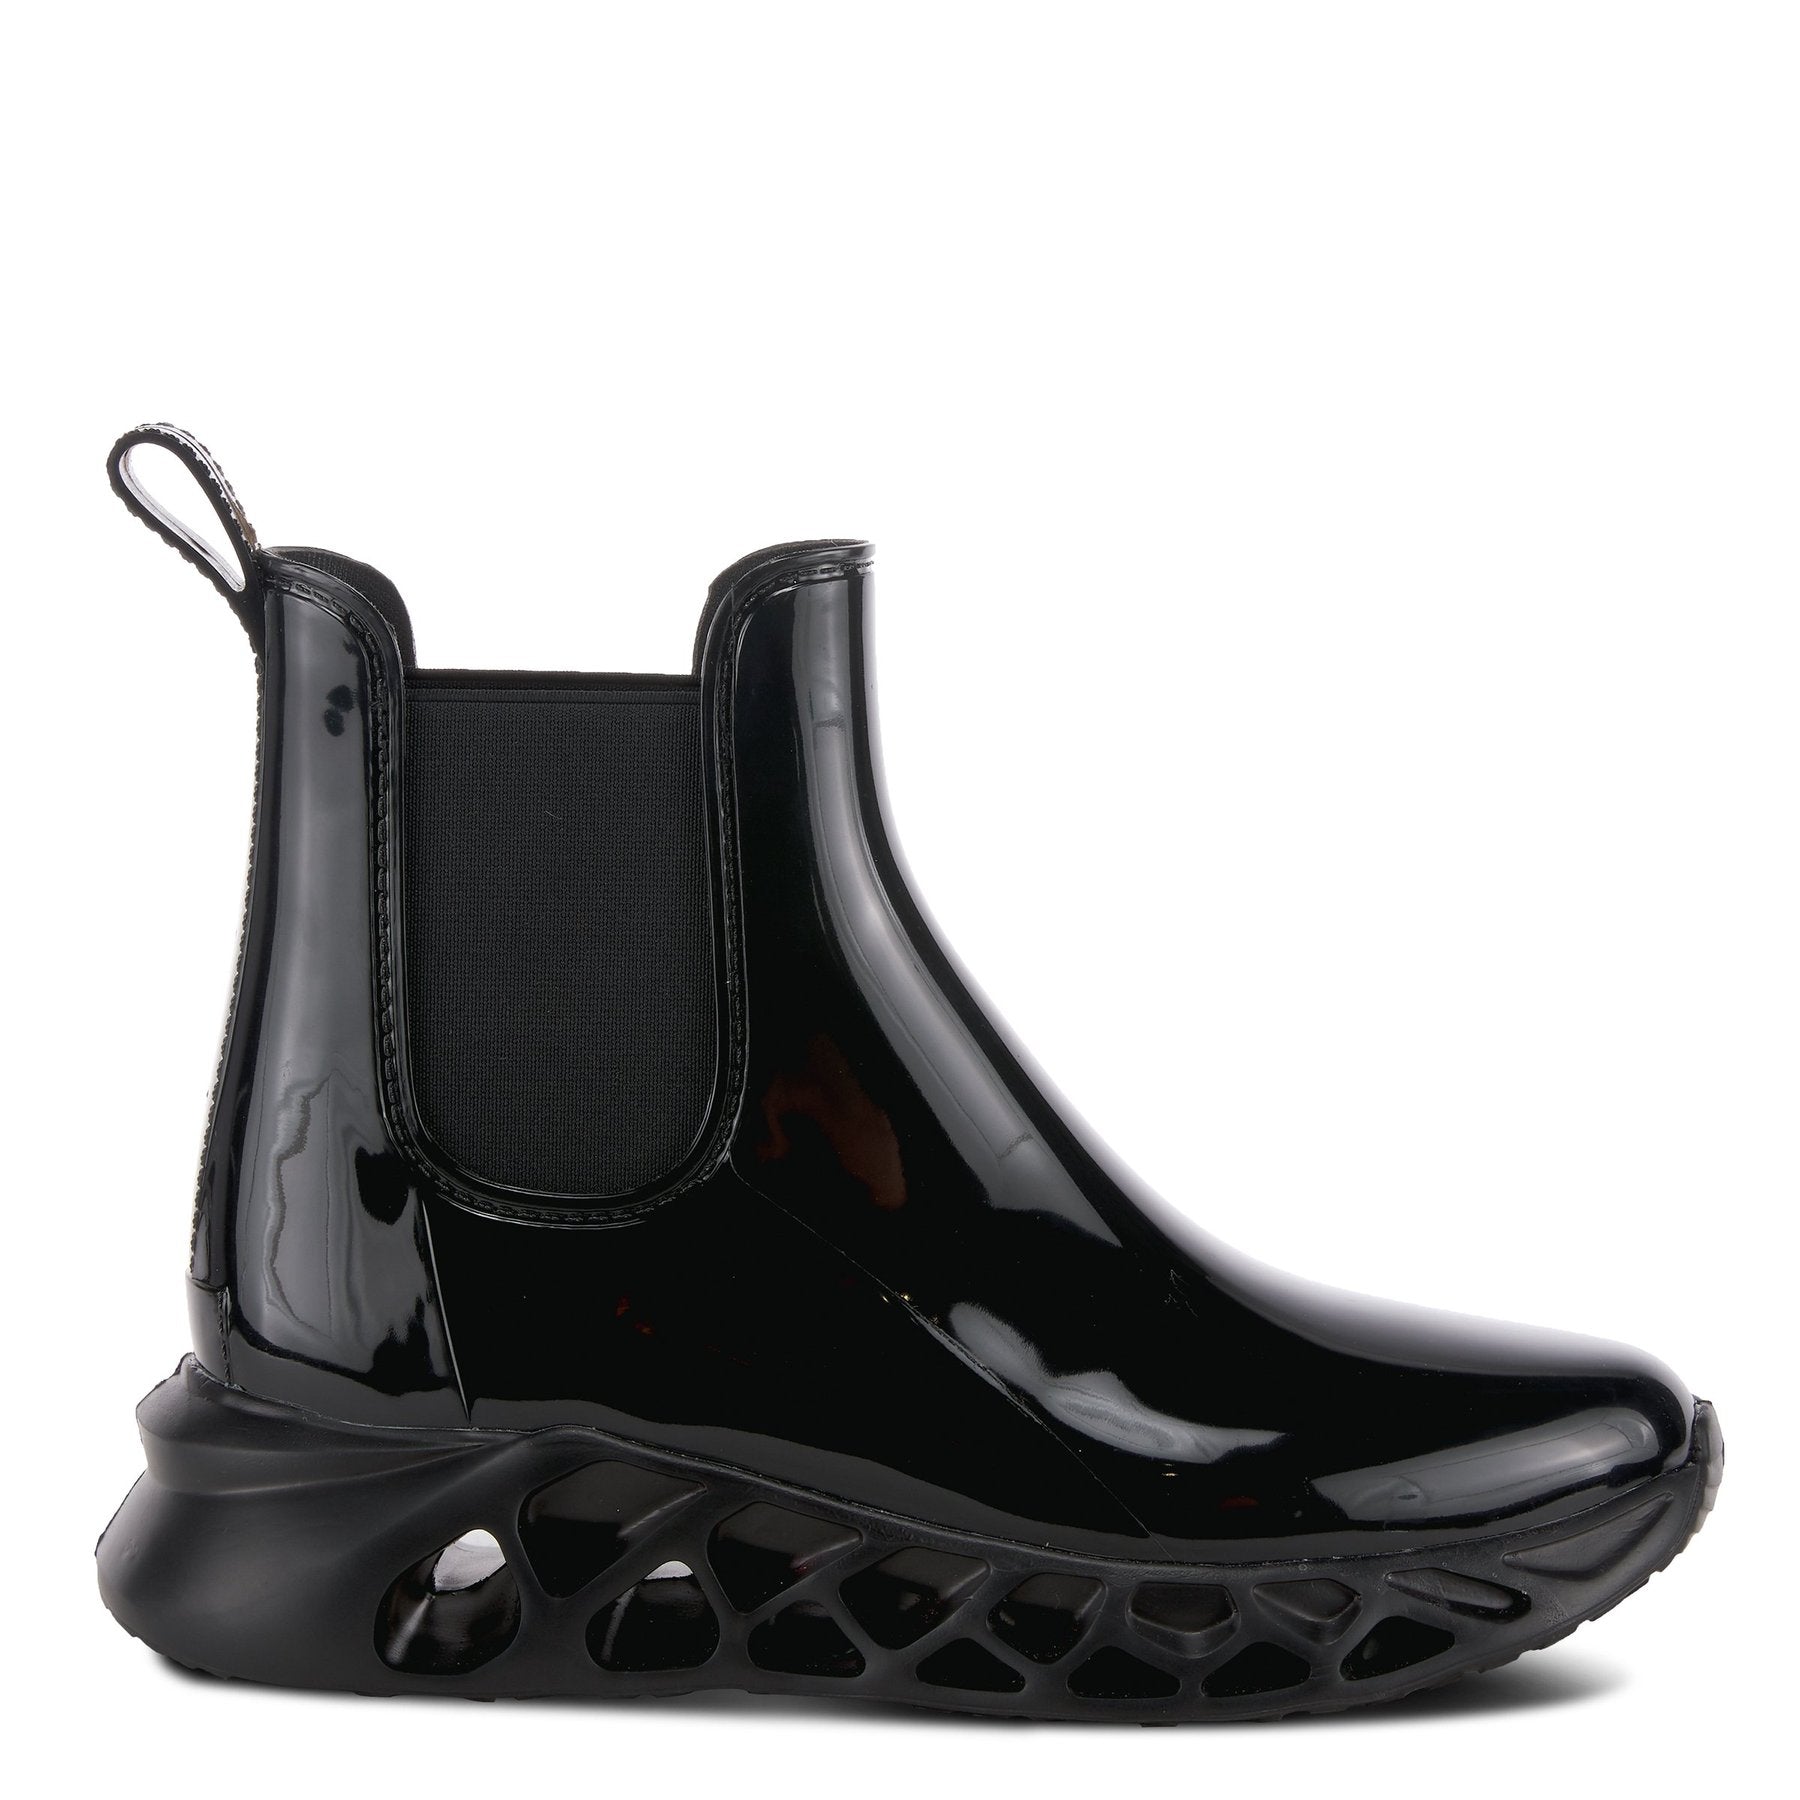 Outer side view of the yasmine boot. This black boot is rubber with elastic side gores and rubber soles with holes.